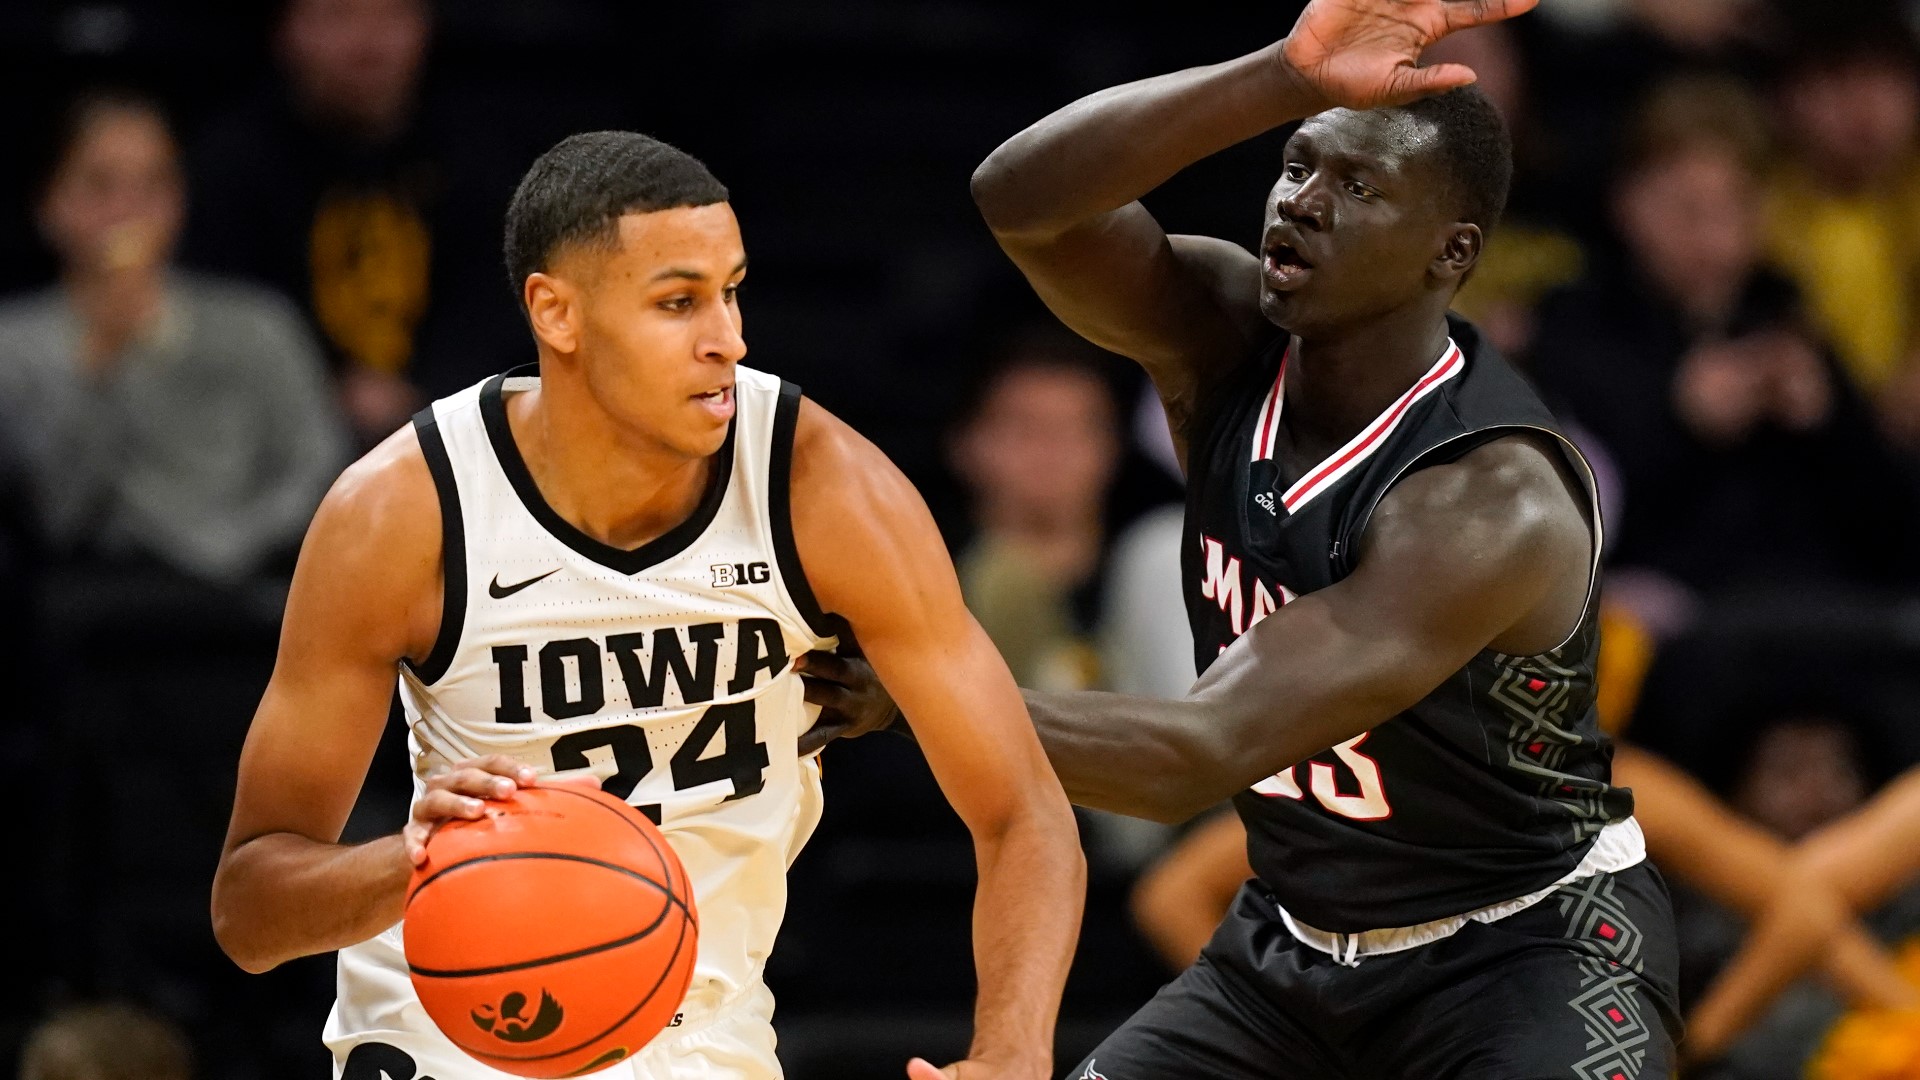 Kris Murray scored a career-high 30 points as Iowa defeated Omaha 100-64 in an Emerald Coast Classic preliminary game.